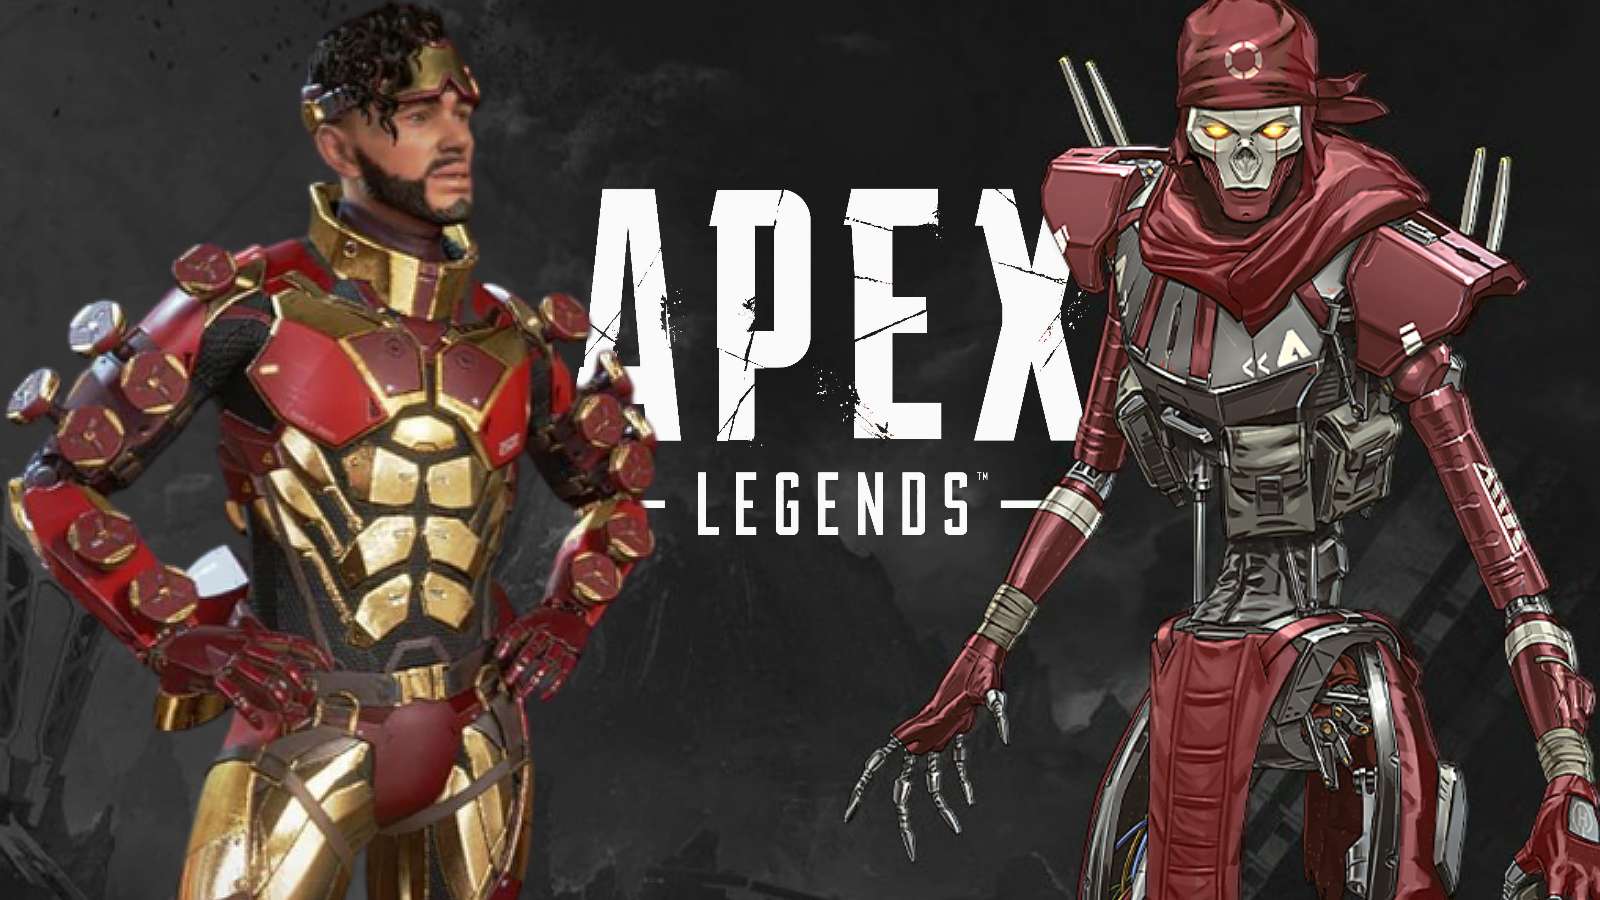 Mirage and Revenant on black background with Apex Legends logo